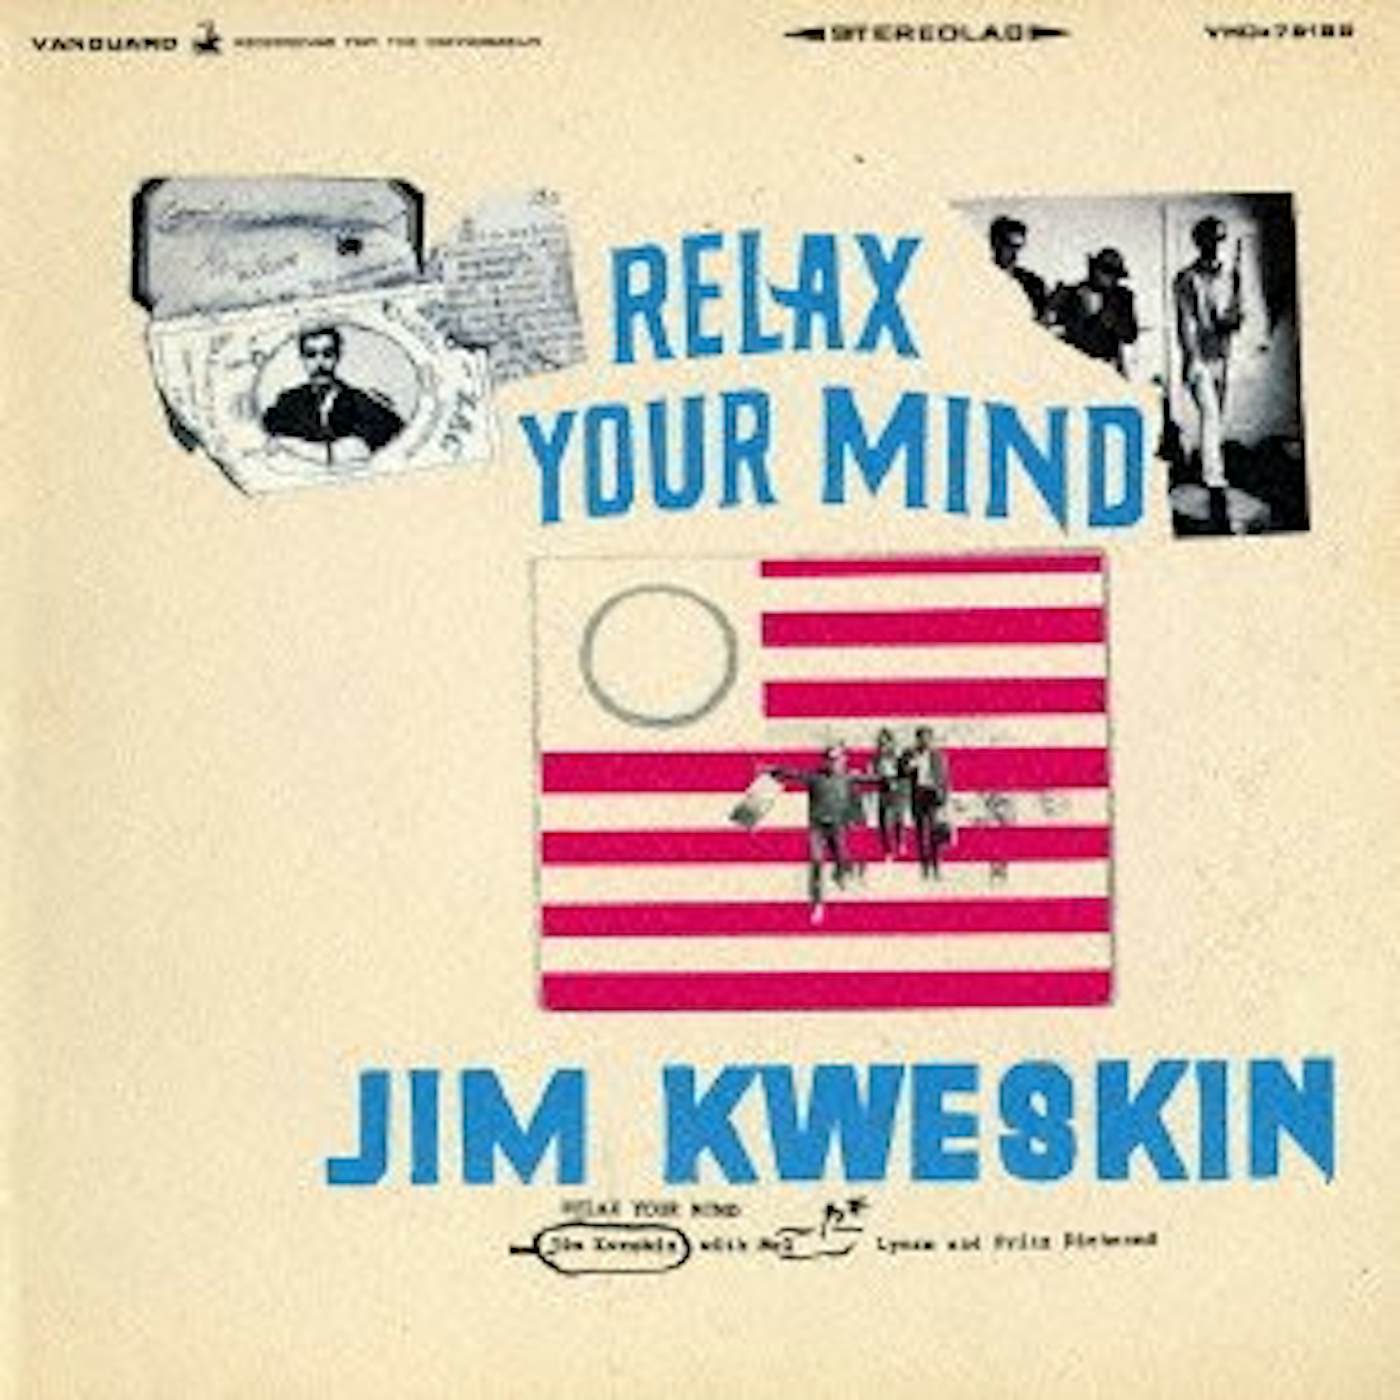 Jim Kweskin RELAX YOUR MIND CD